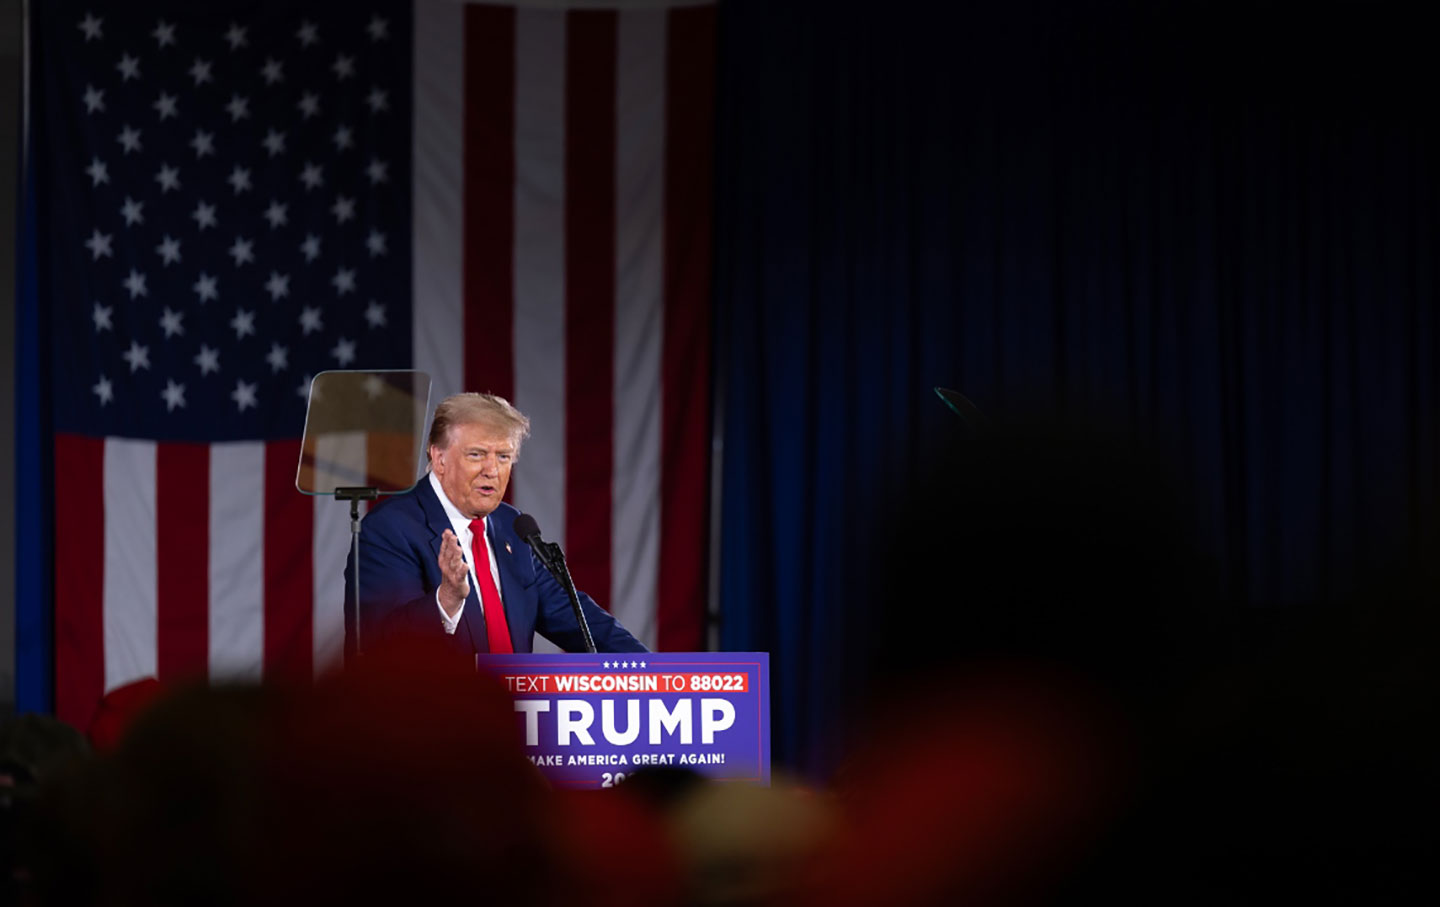 Donald Trump at a podium in front of an American flag.